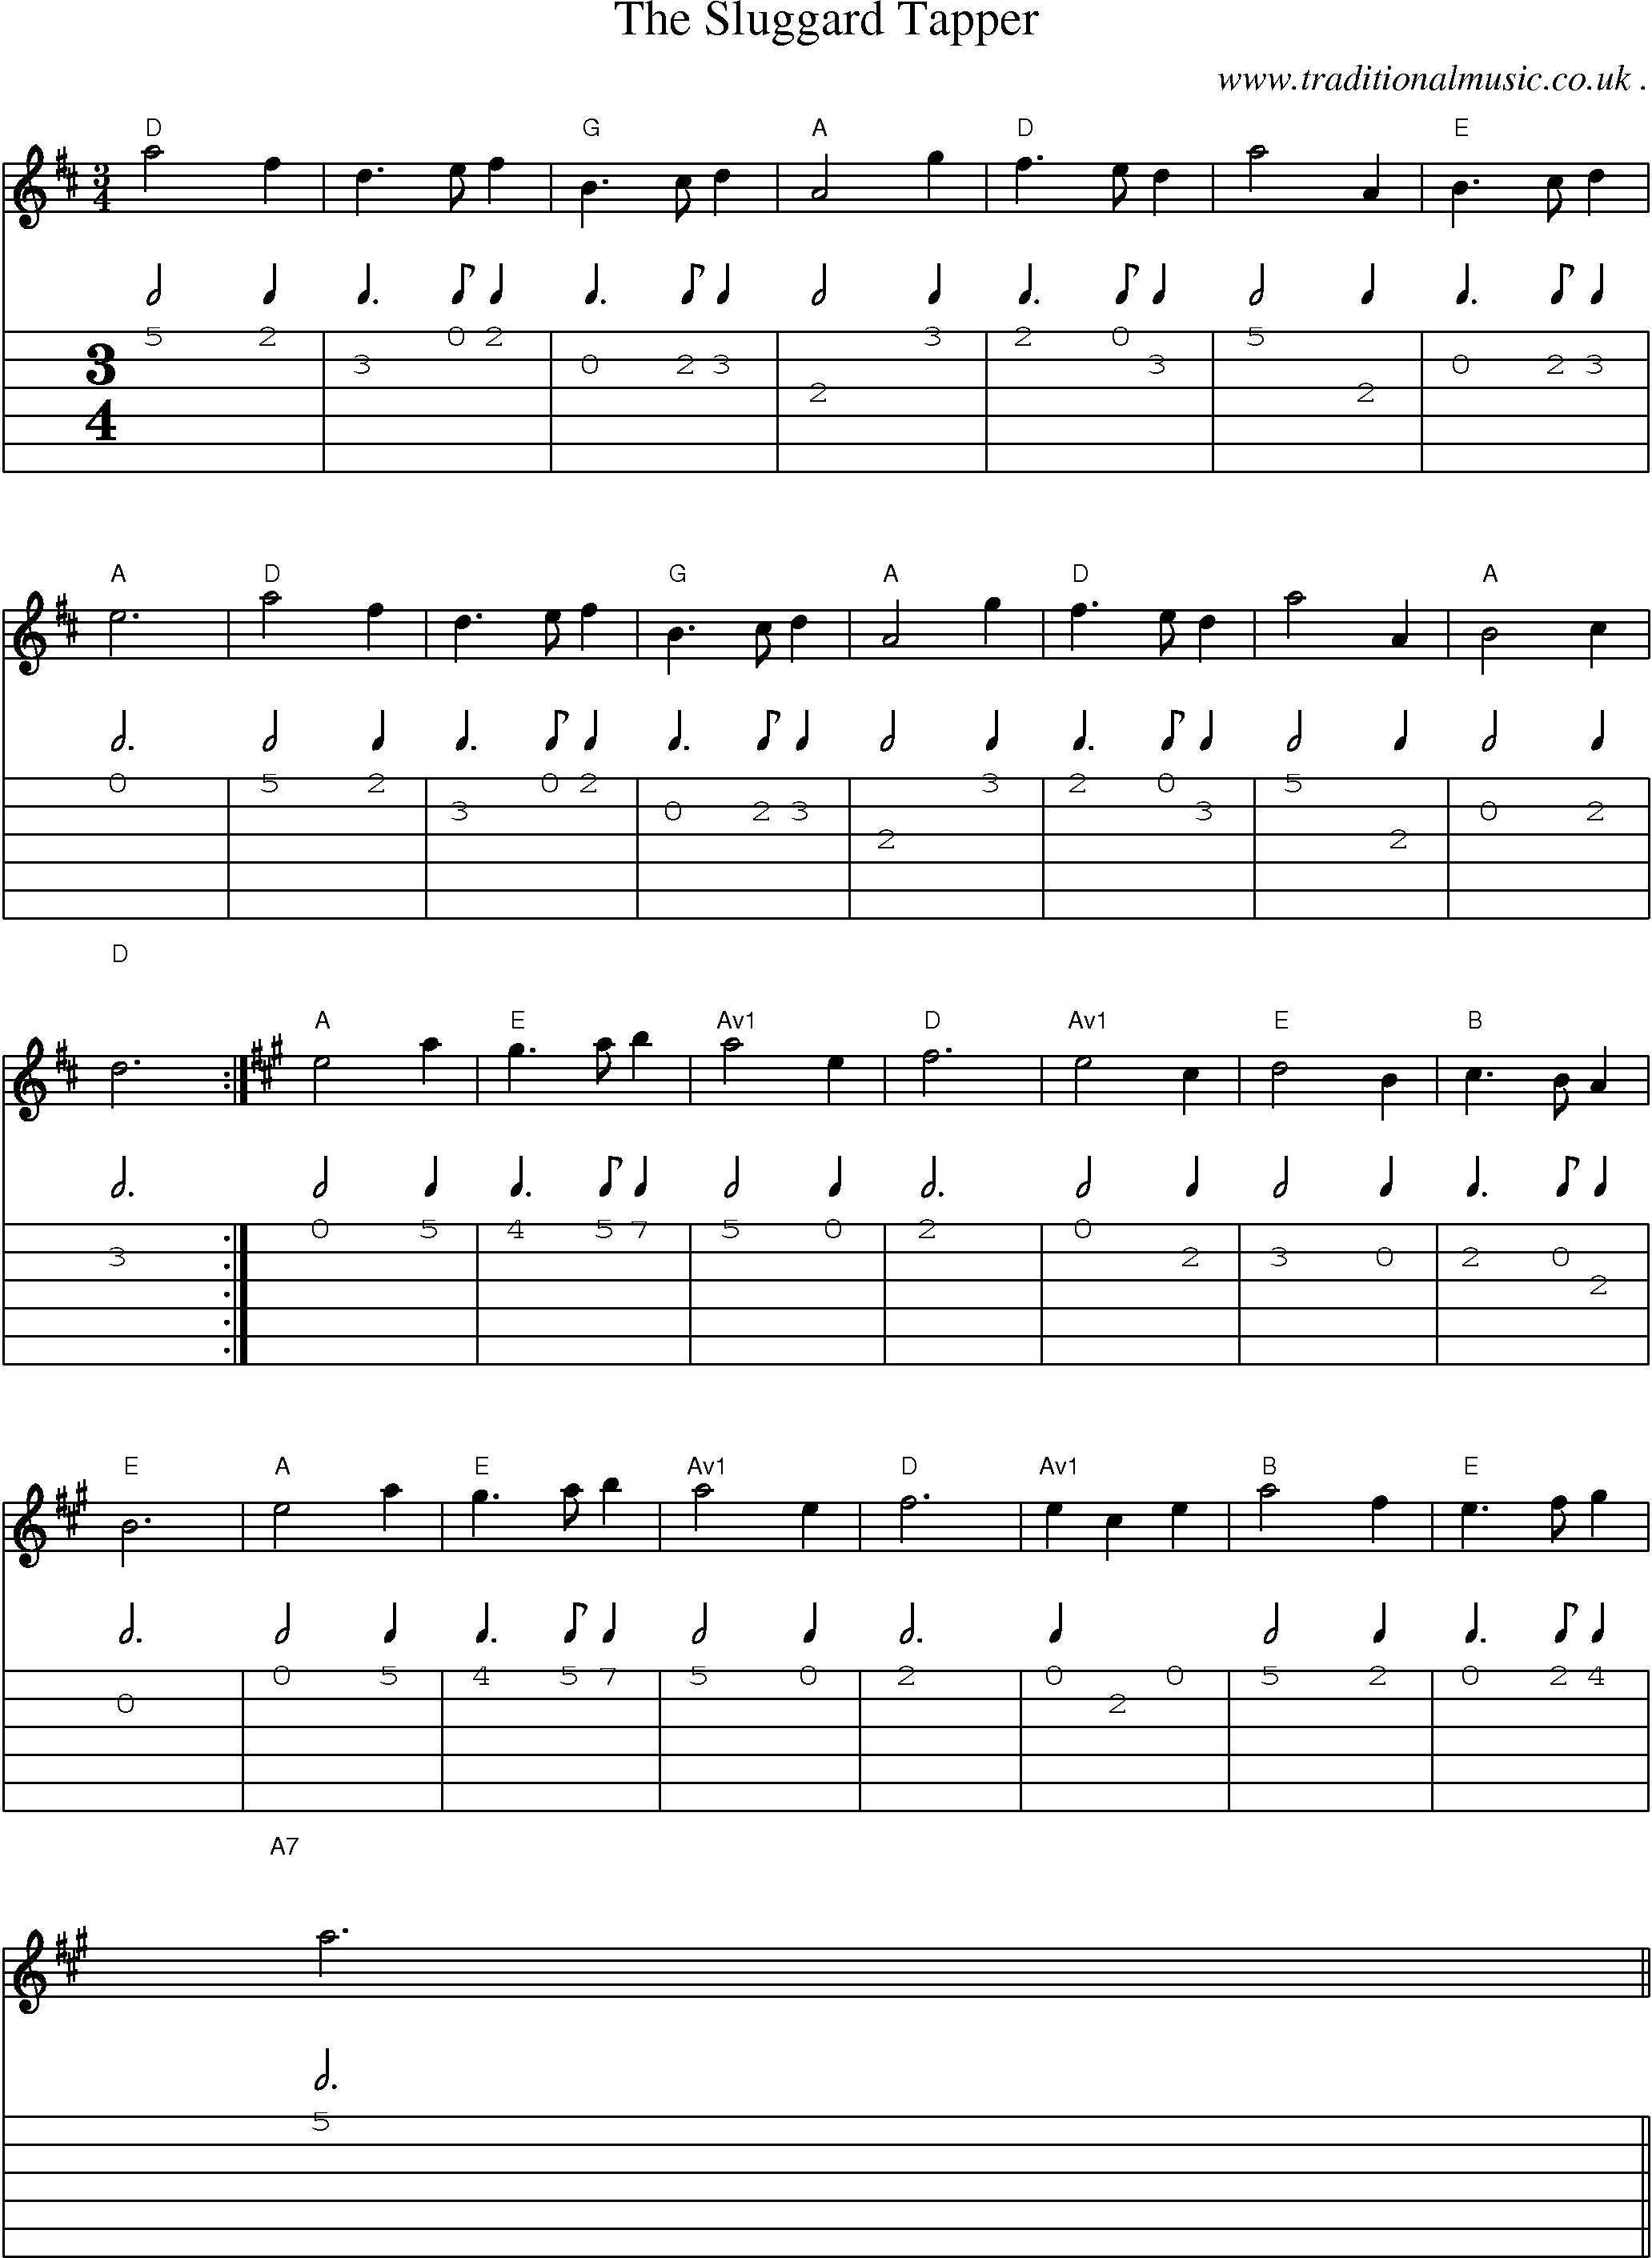 Sheet-Music and Guitar Tabs for The Sluggard Tapper